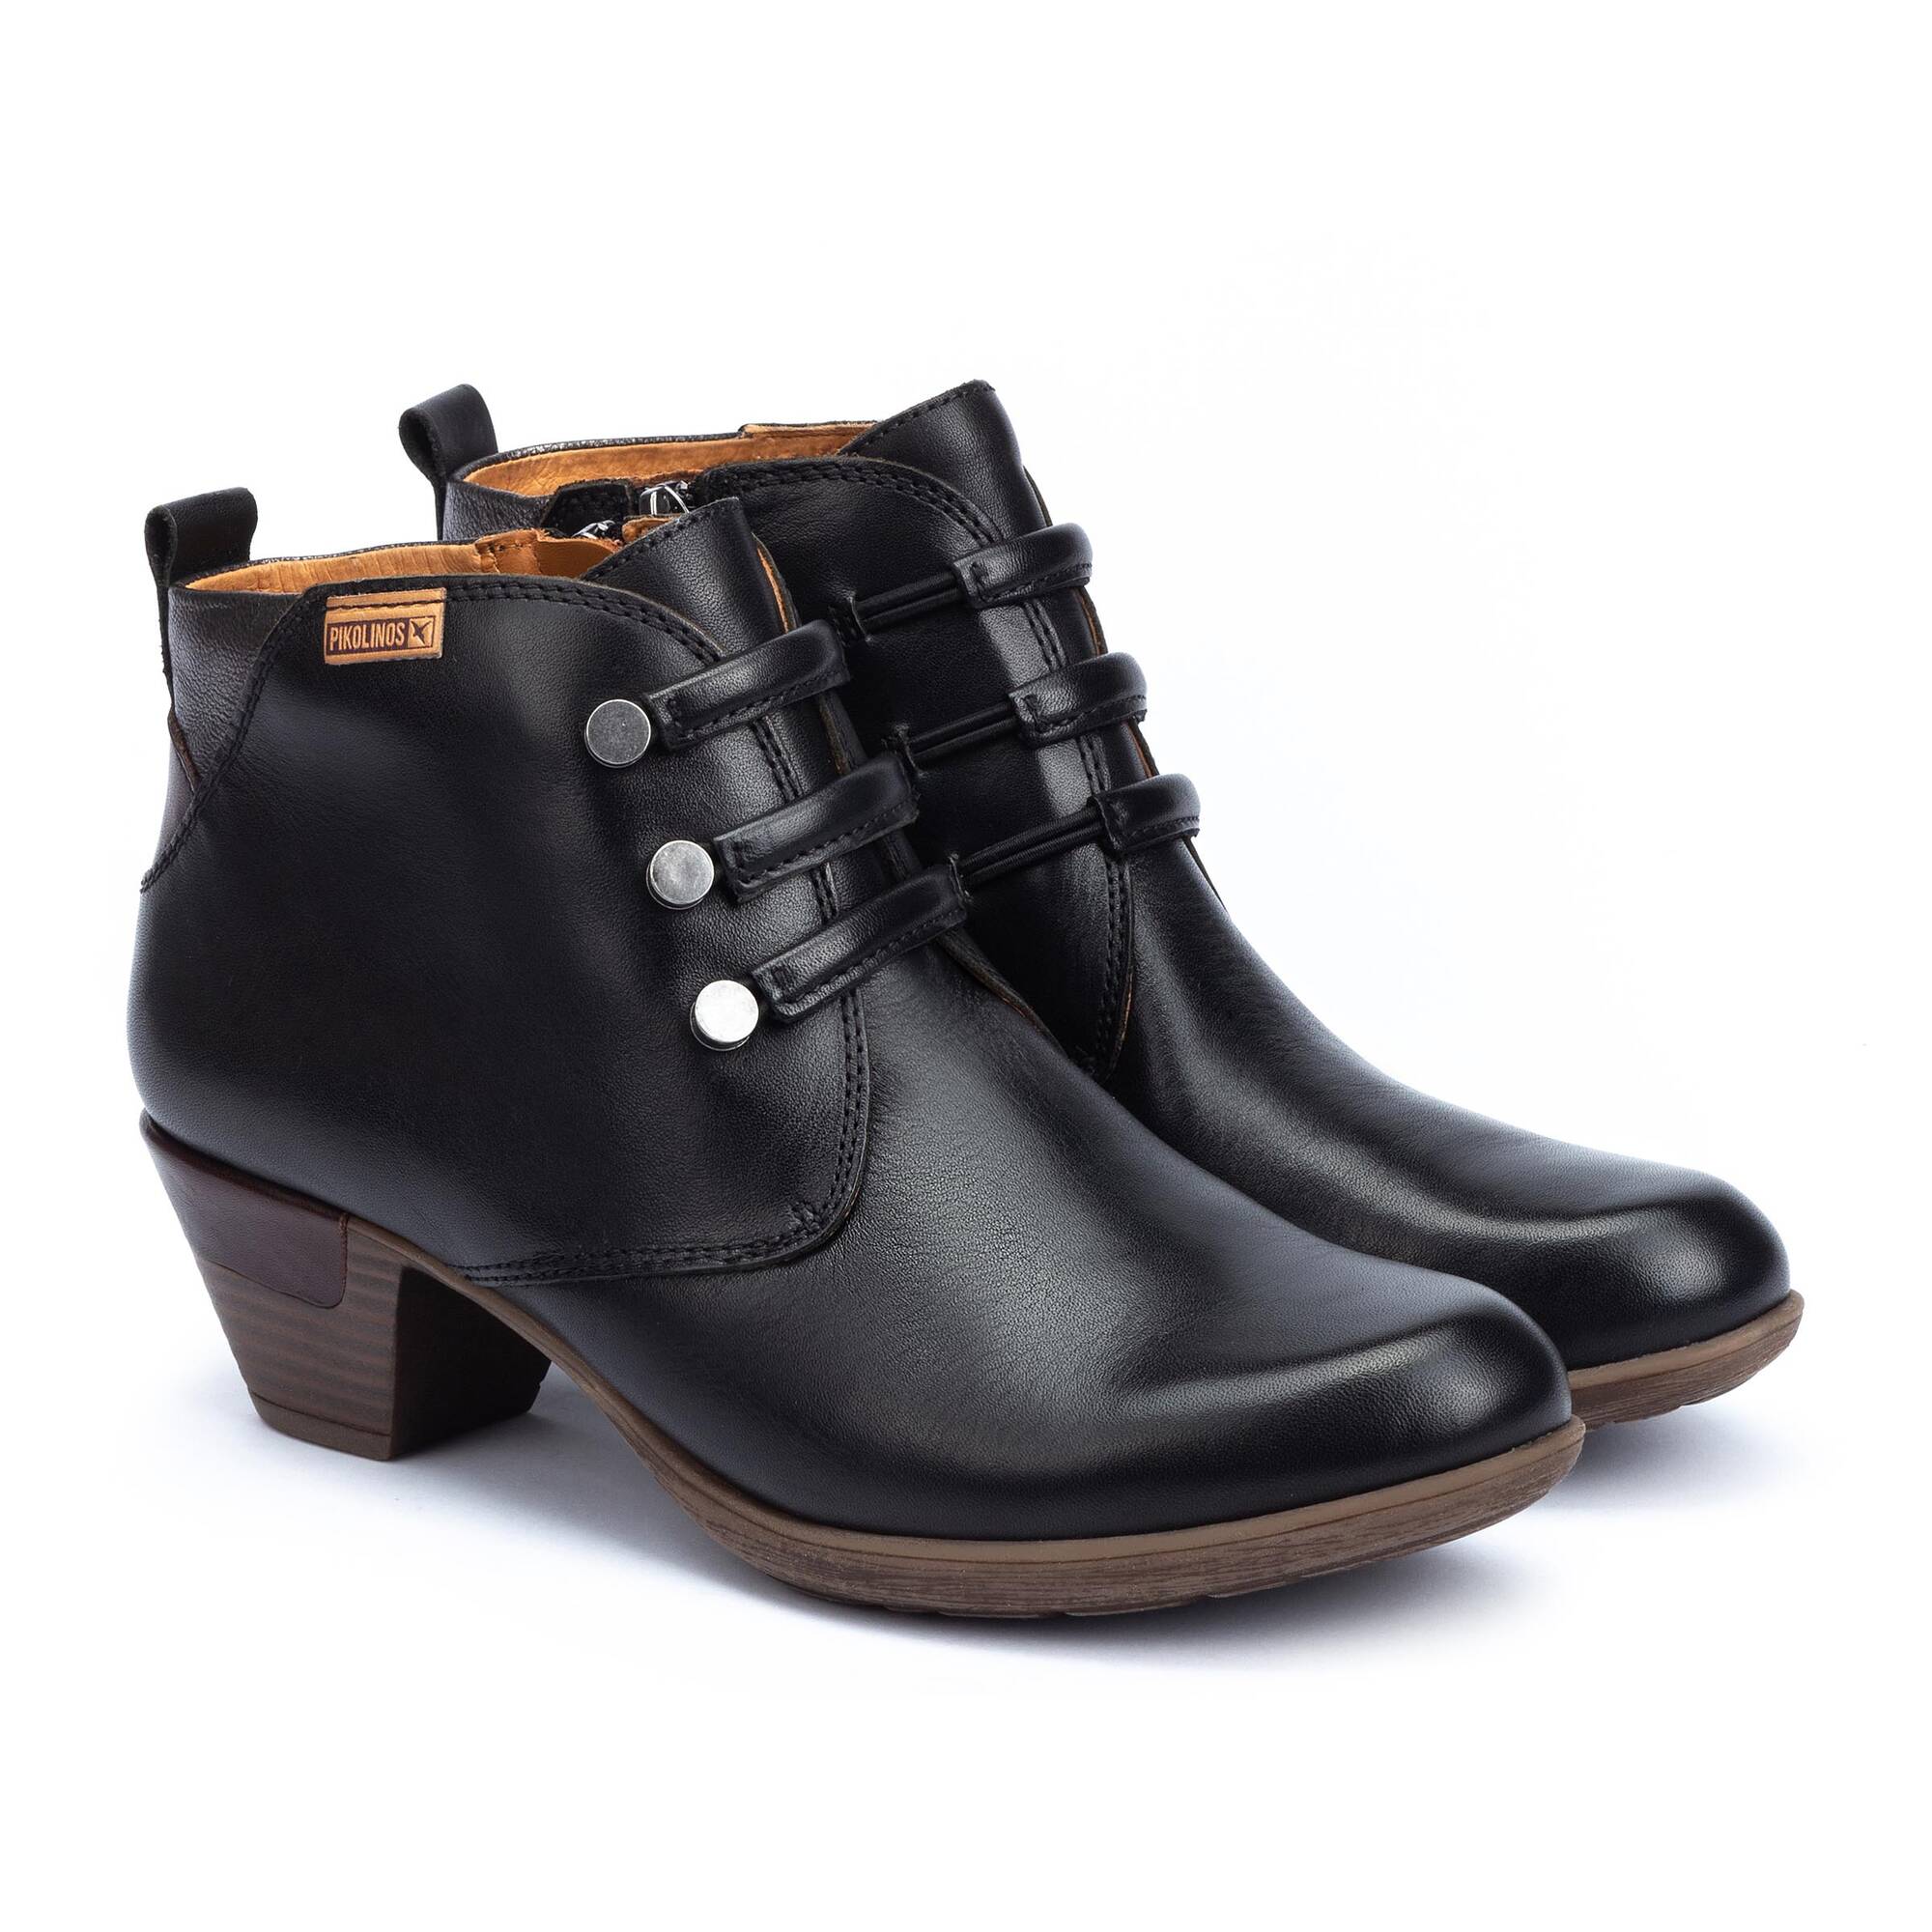 Ankle boots | ROTTERDAM 902-8746, BLACK, large image number 20 | null